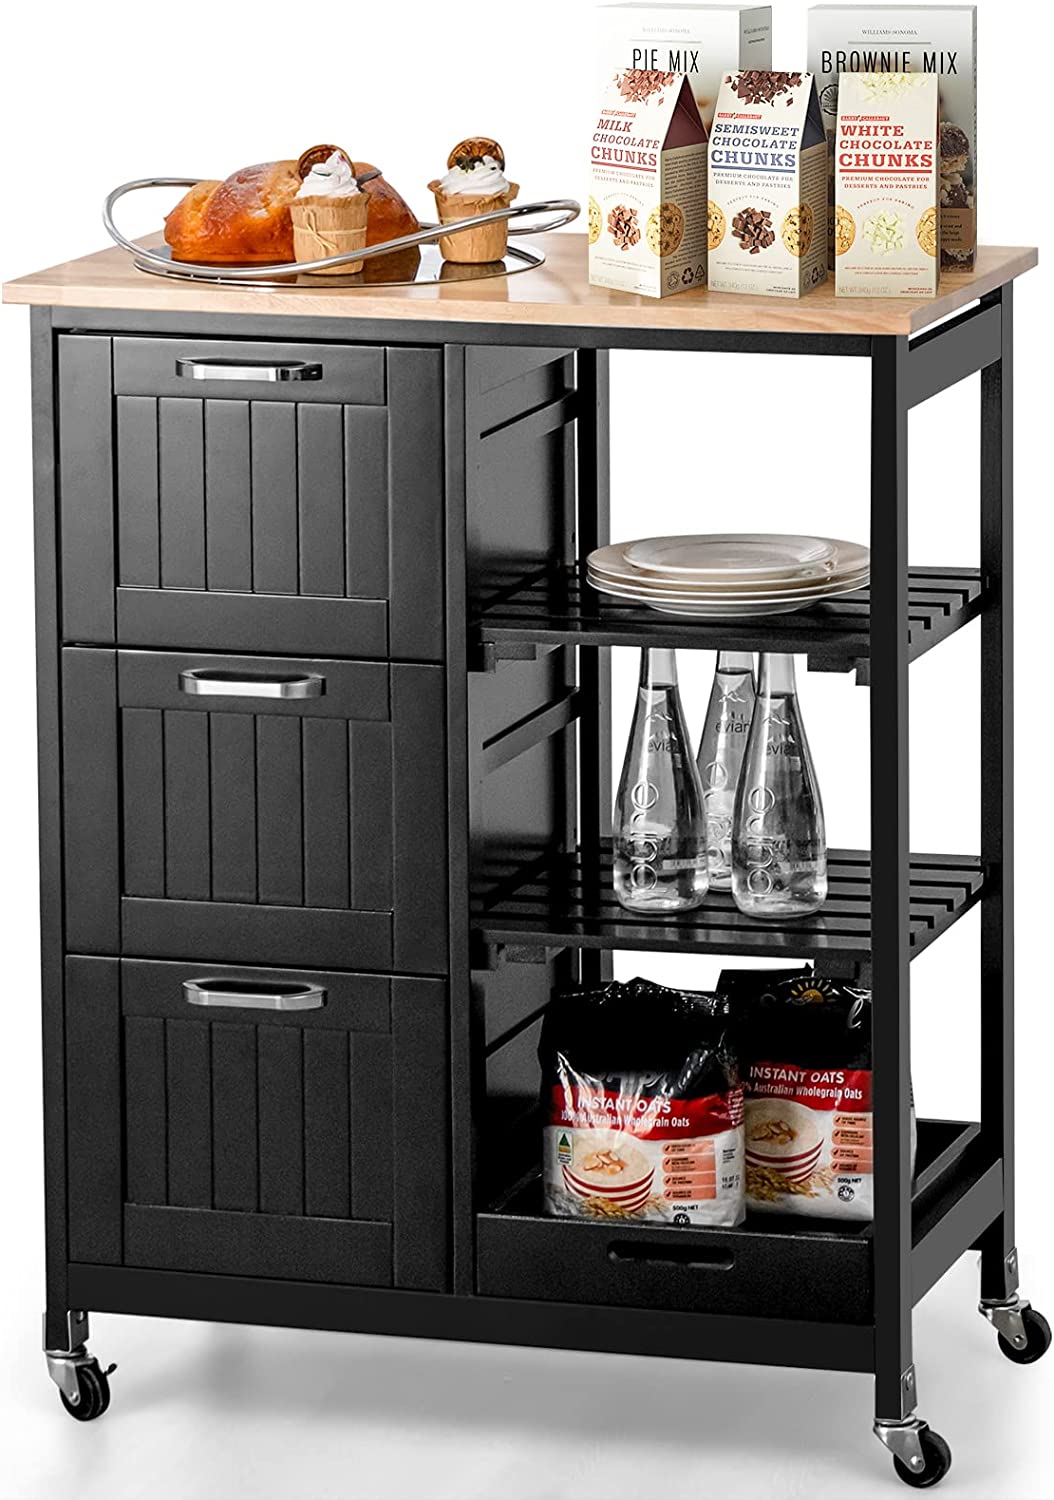 Giantex Kitchen Island on Wheel with Storage, Multi-purpose Rolling Cart w/ Rubber Wood Countertop, 3 Drawers